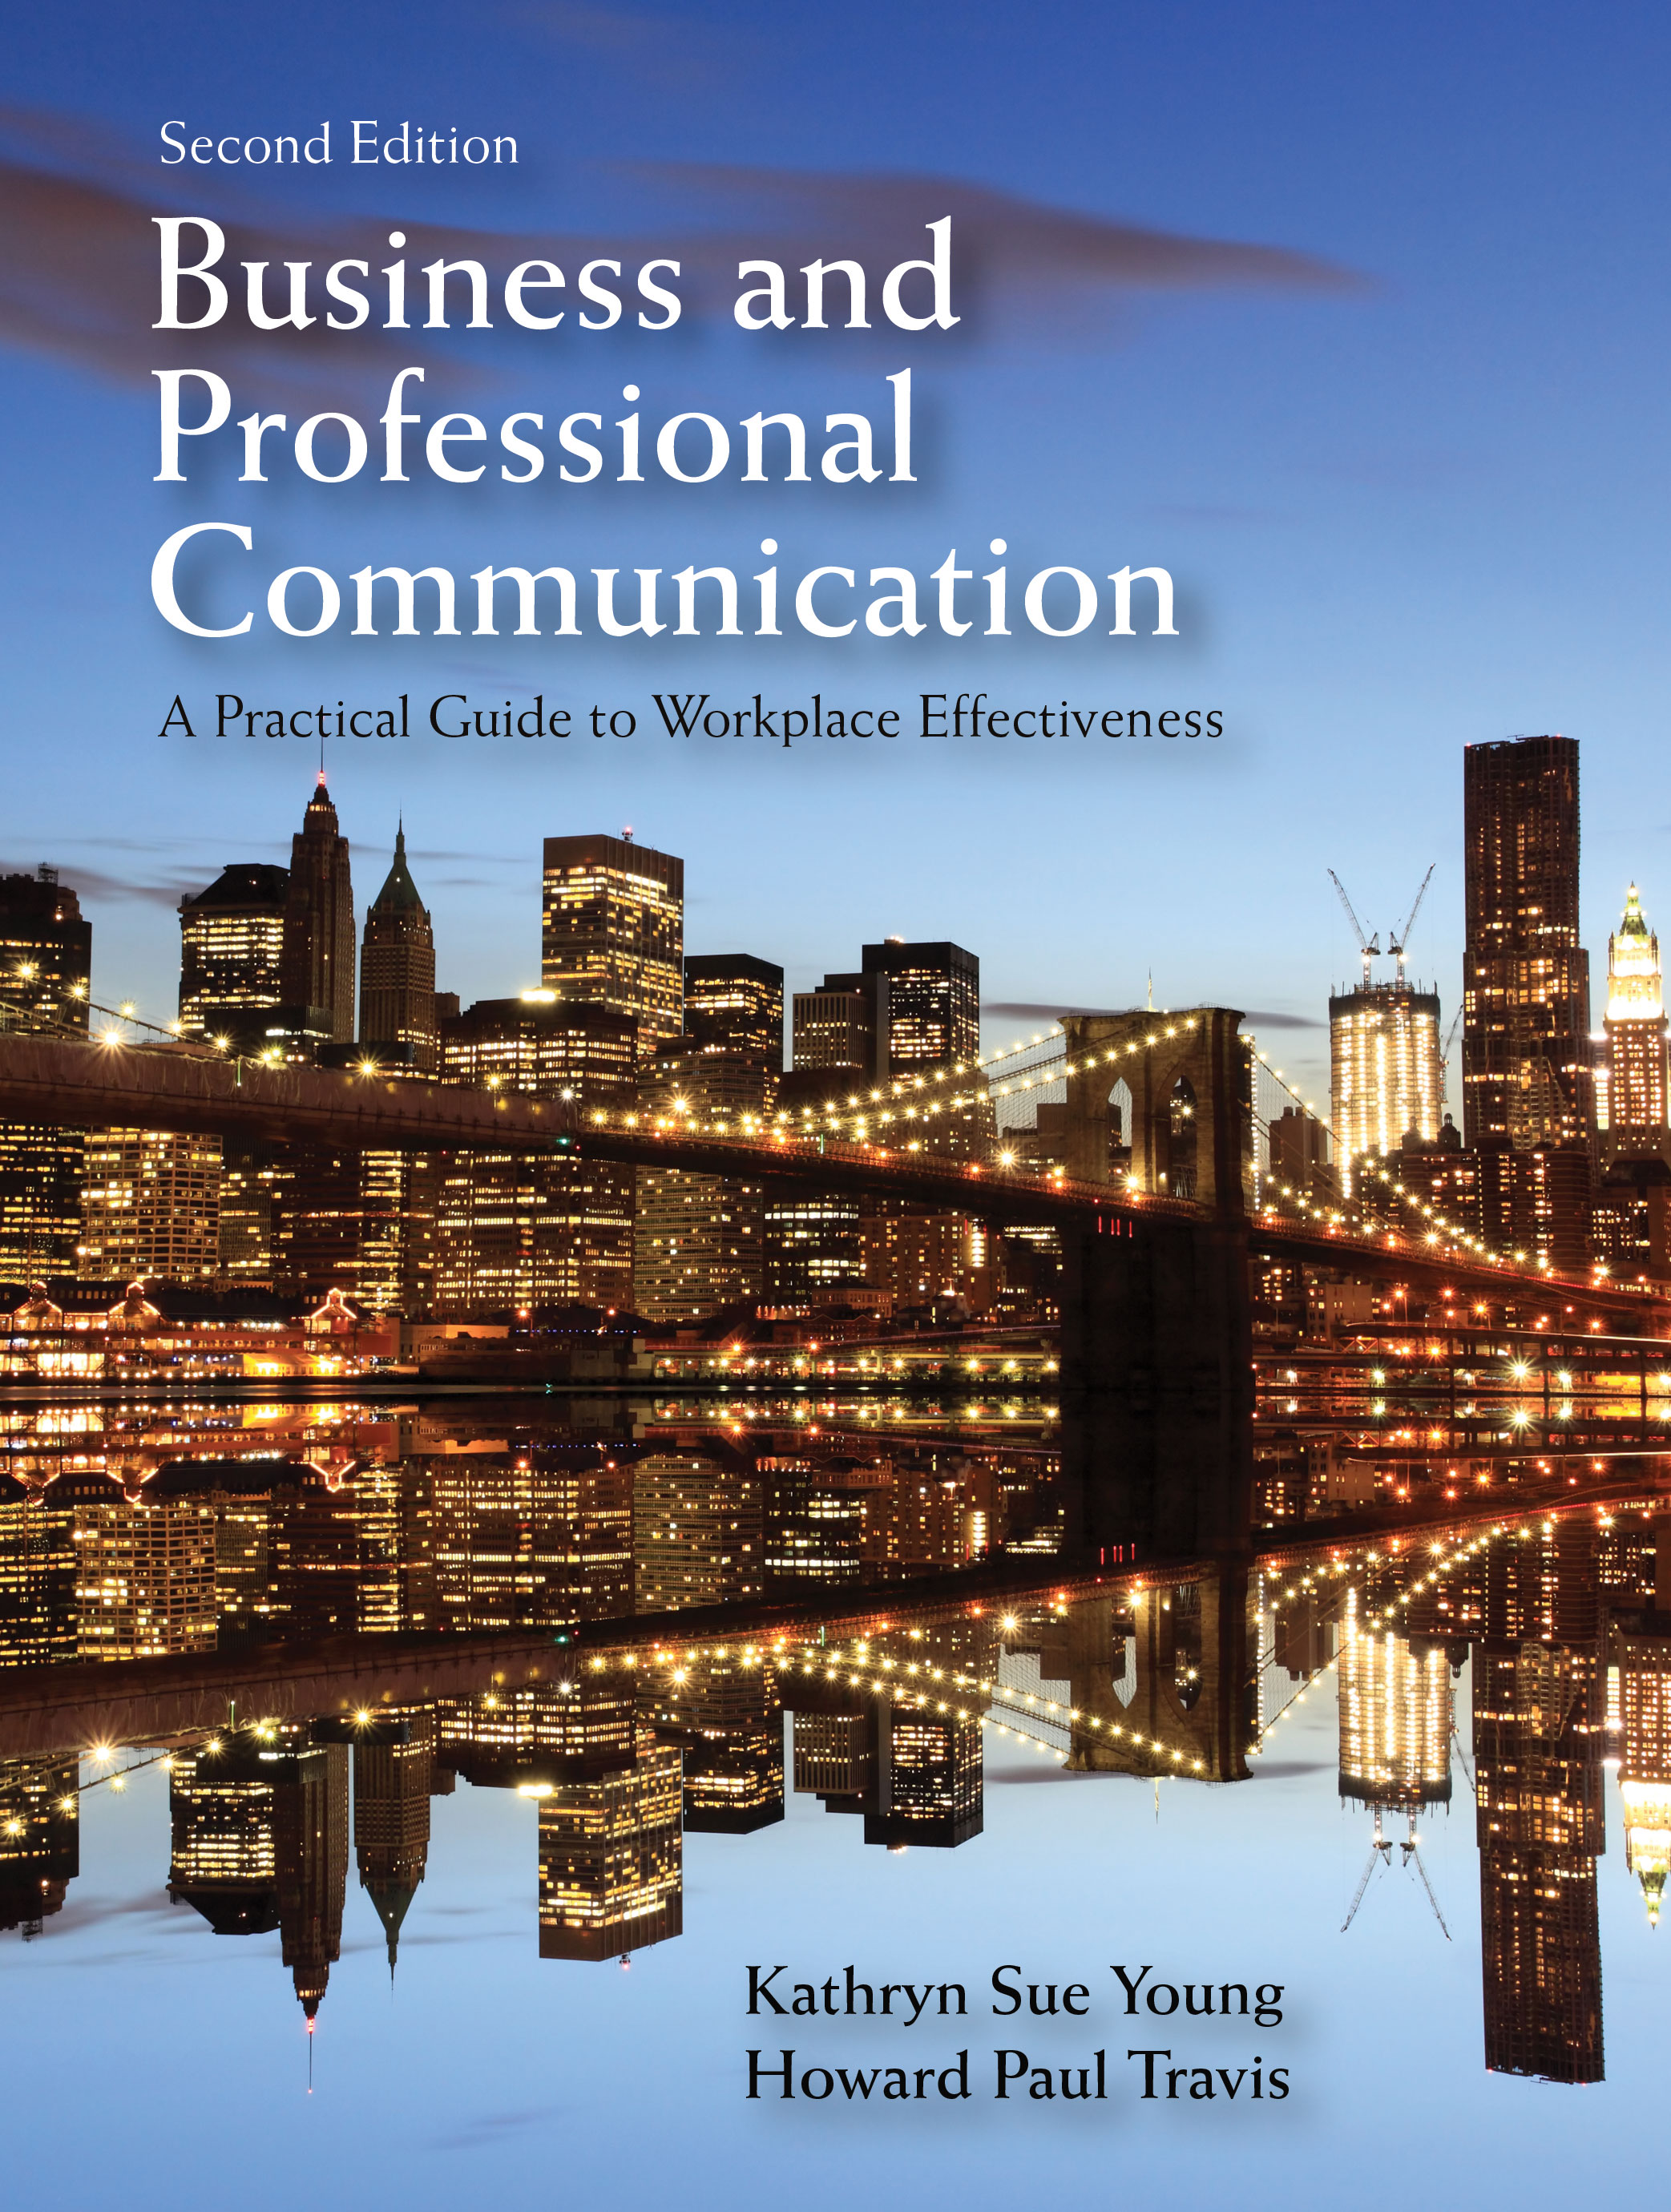 Business and Professional Communication: A Practical Guide to Workplace Effectiveness, Second Edition by Kathryn Sue Young, Howard Paul Travis